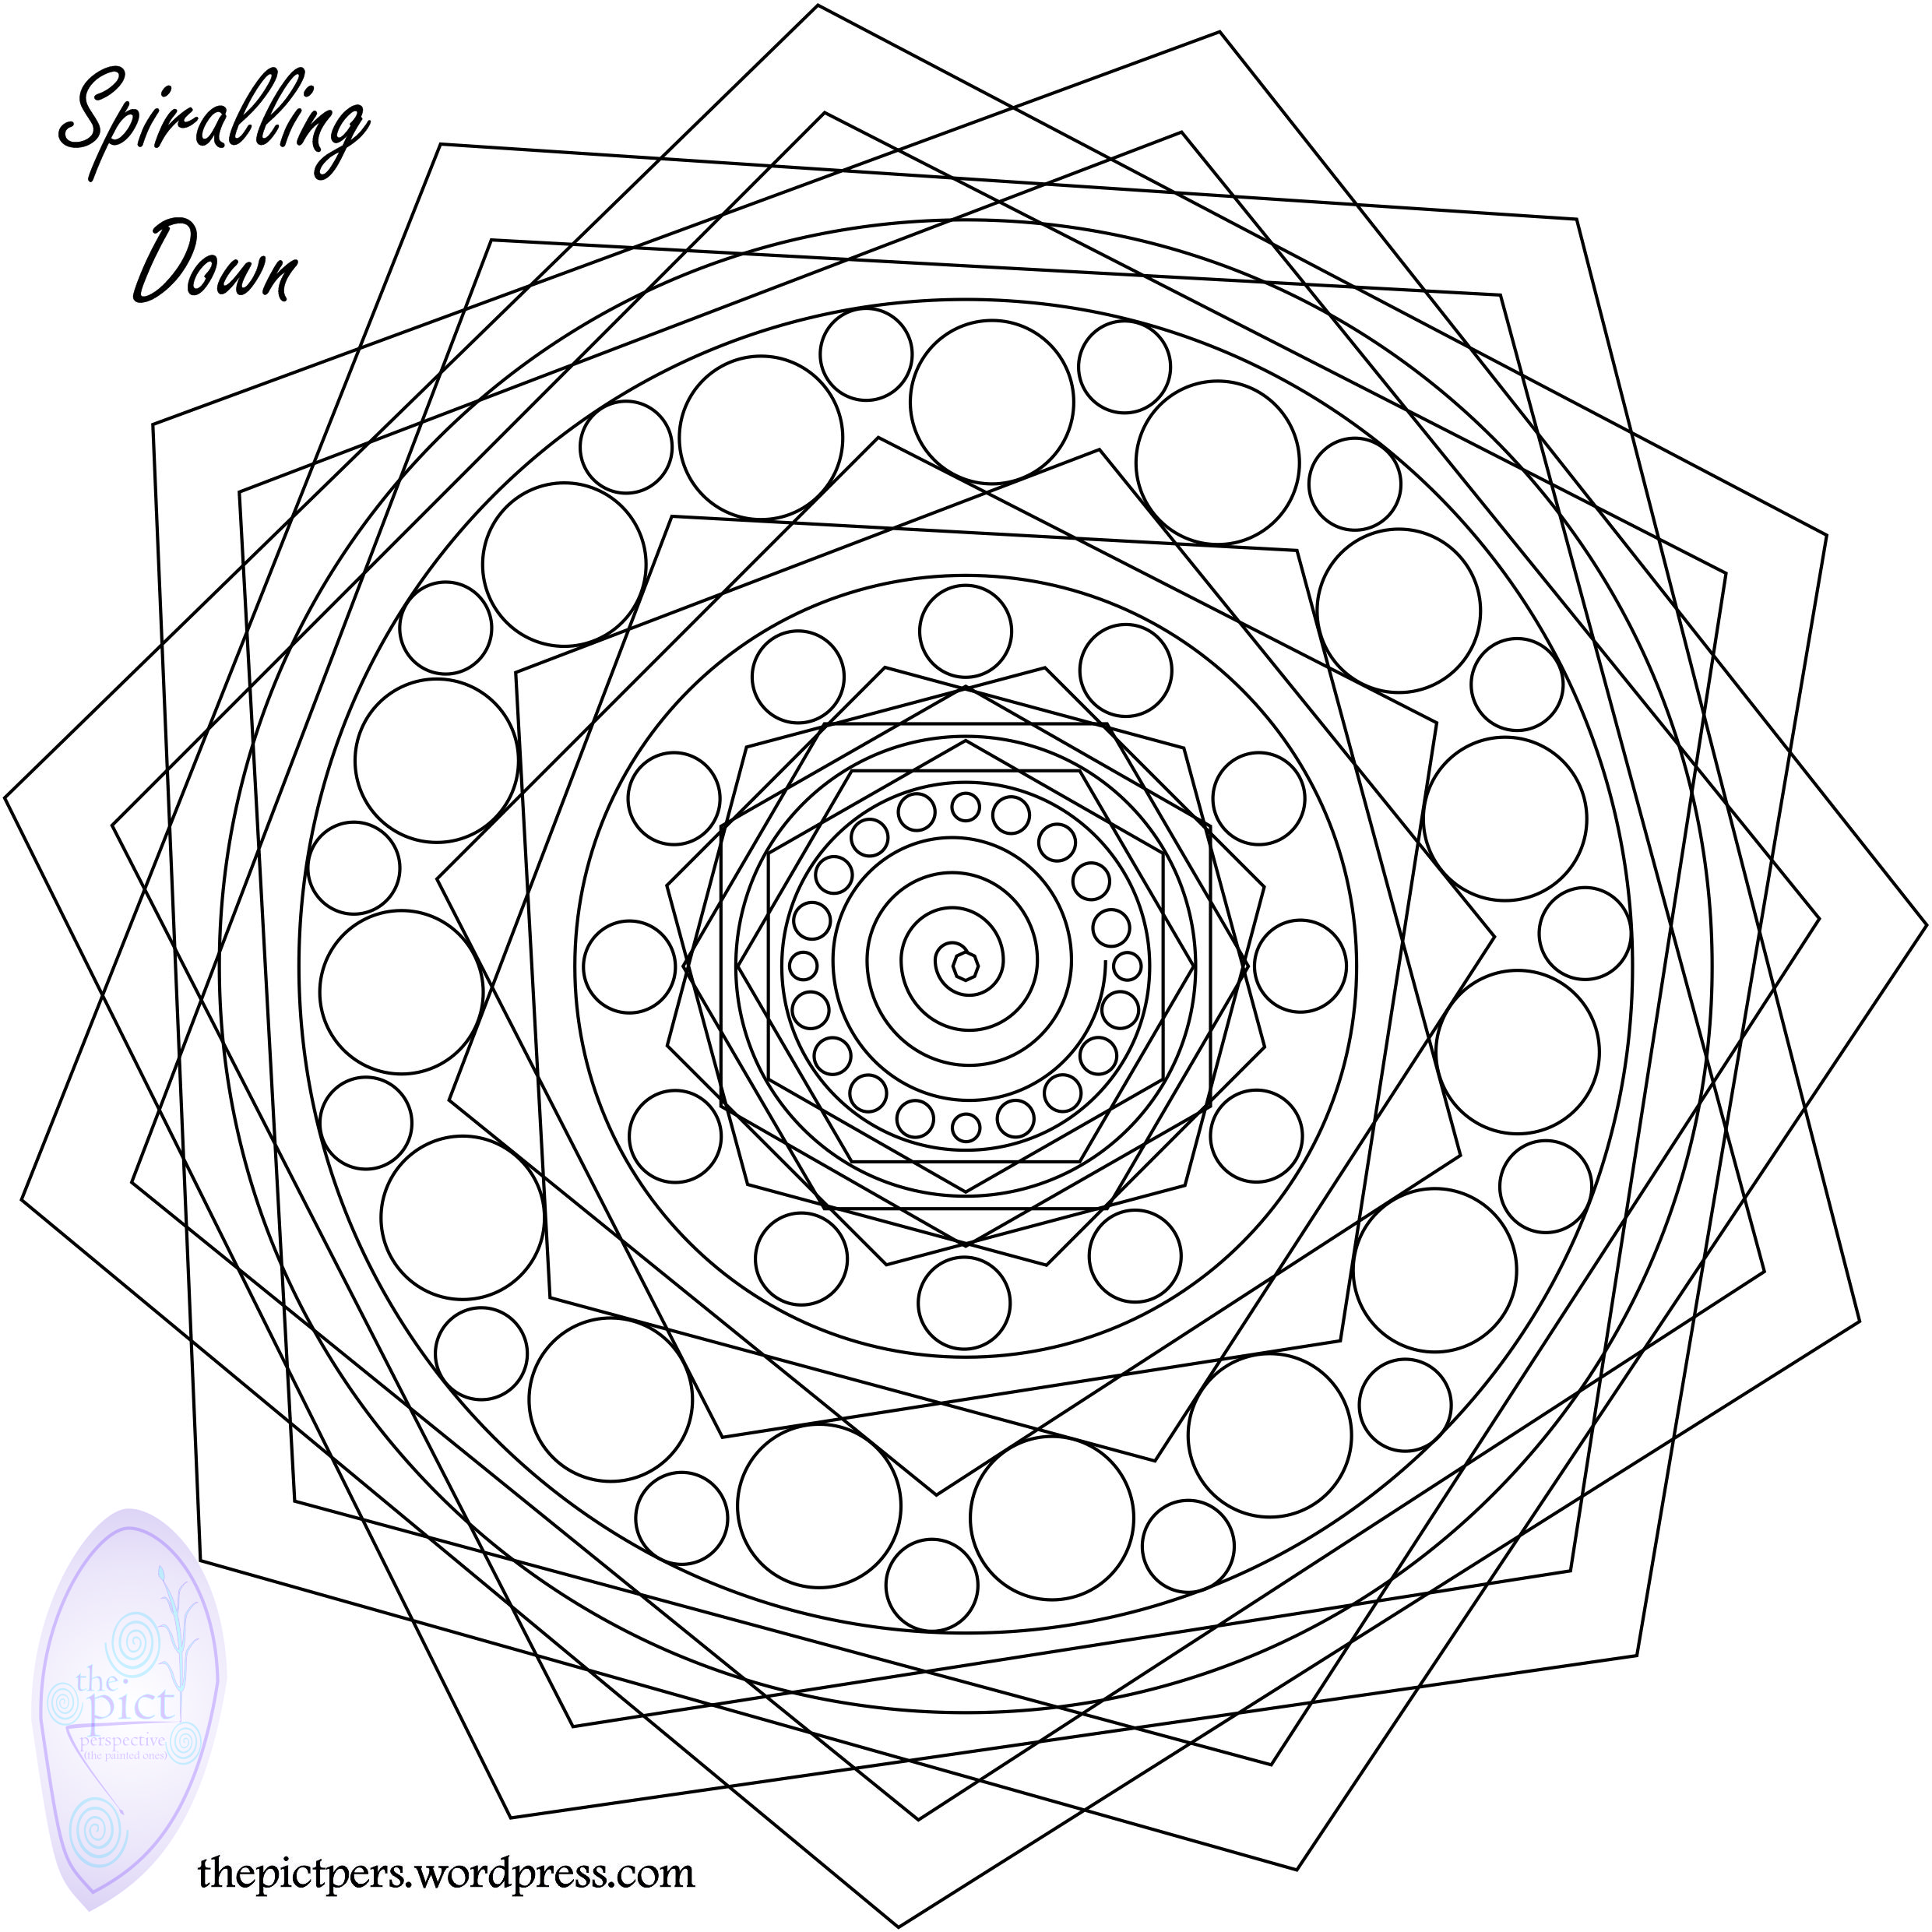 Digital design - this design is in one of our books - Mandala Art and Doodling Book on Amazon